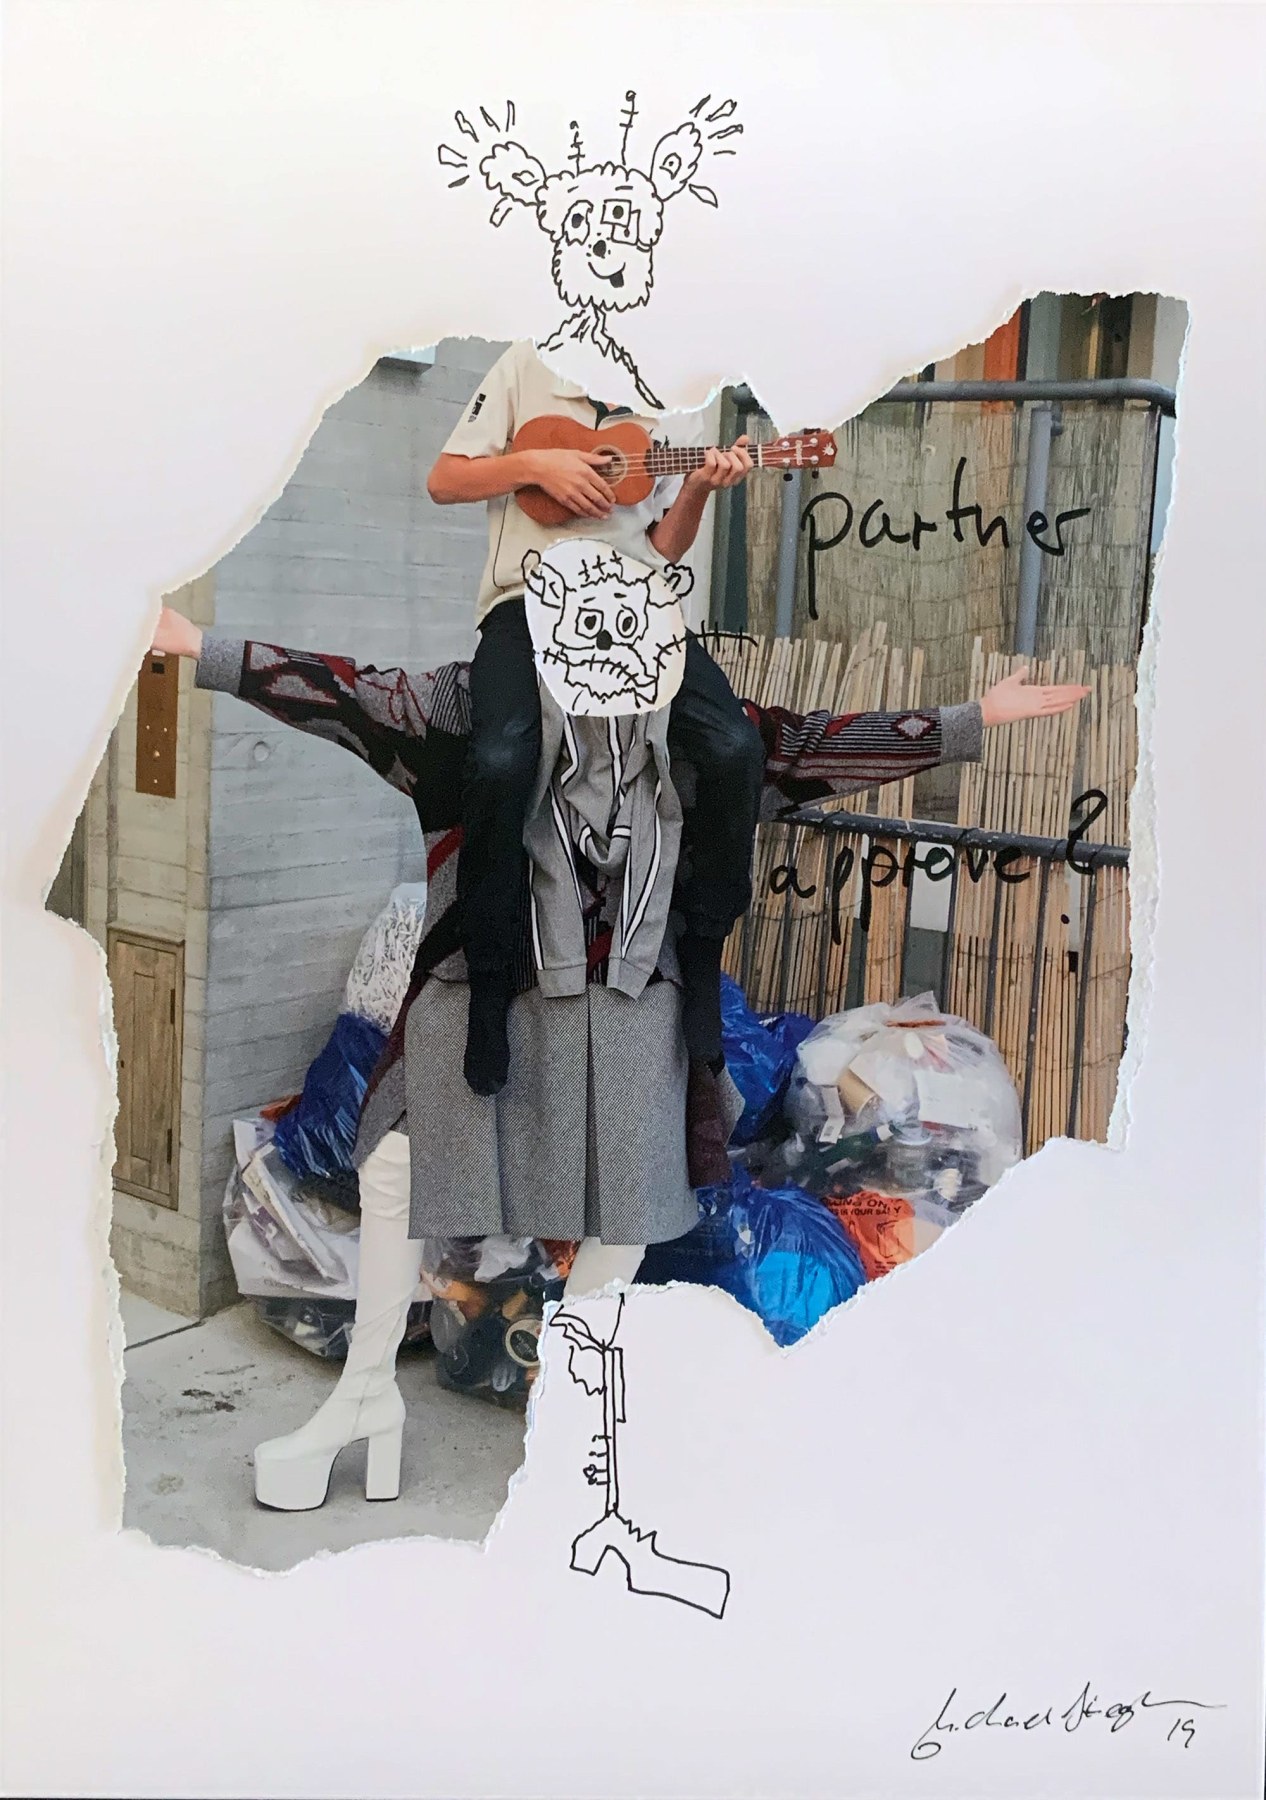 Michael Stiegler  Partner Approve, 2019 art from the exhibition on Bowery at Lone Goat Gallery